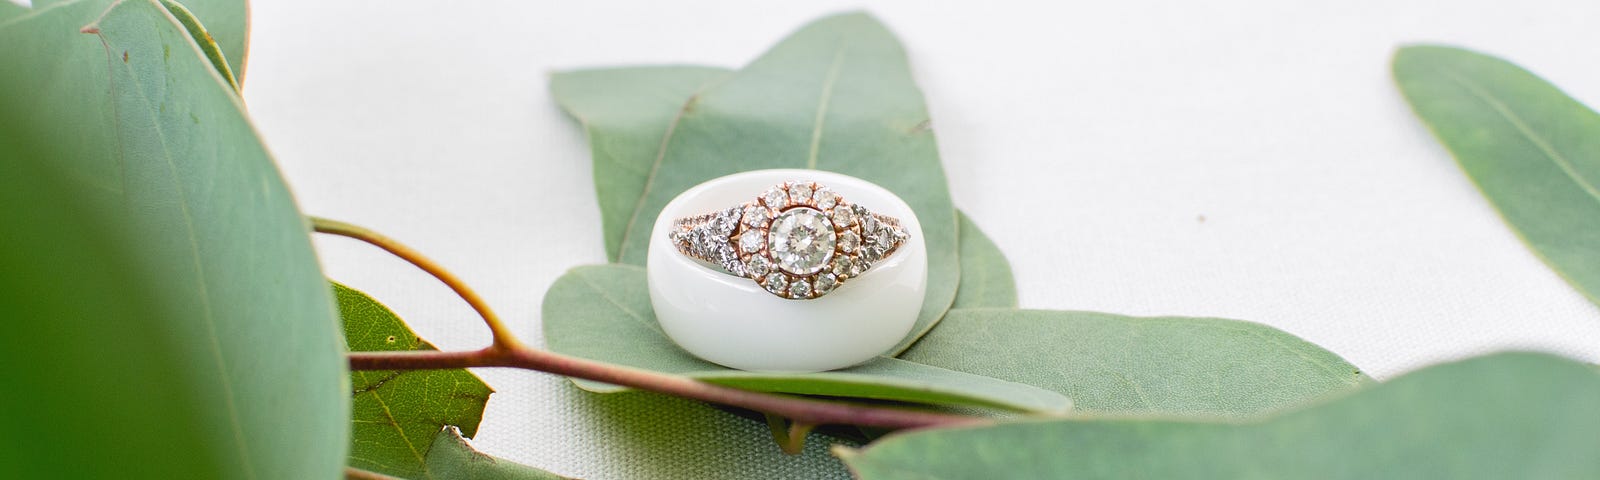 A golden feminine engagement ring studded with a halo of diamonds is nestled on top of a white masculine wedding ring on in the center of the frame with leaves scattered along the bottom half of the frame.